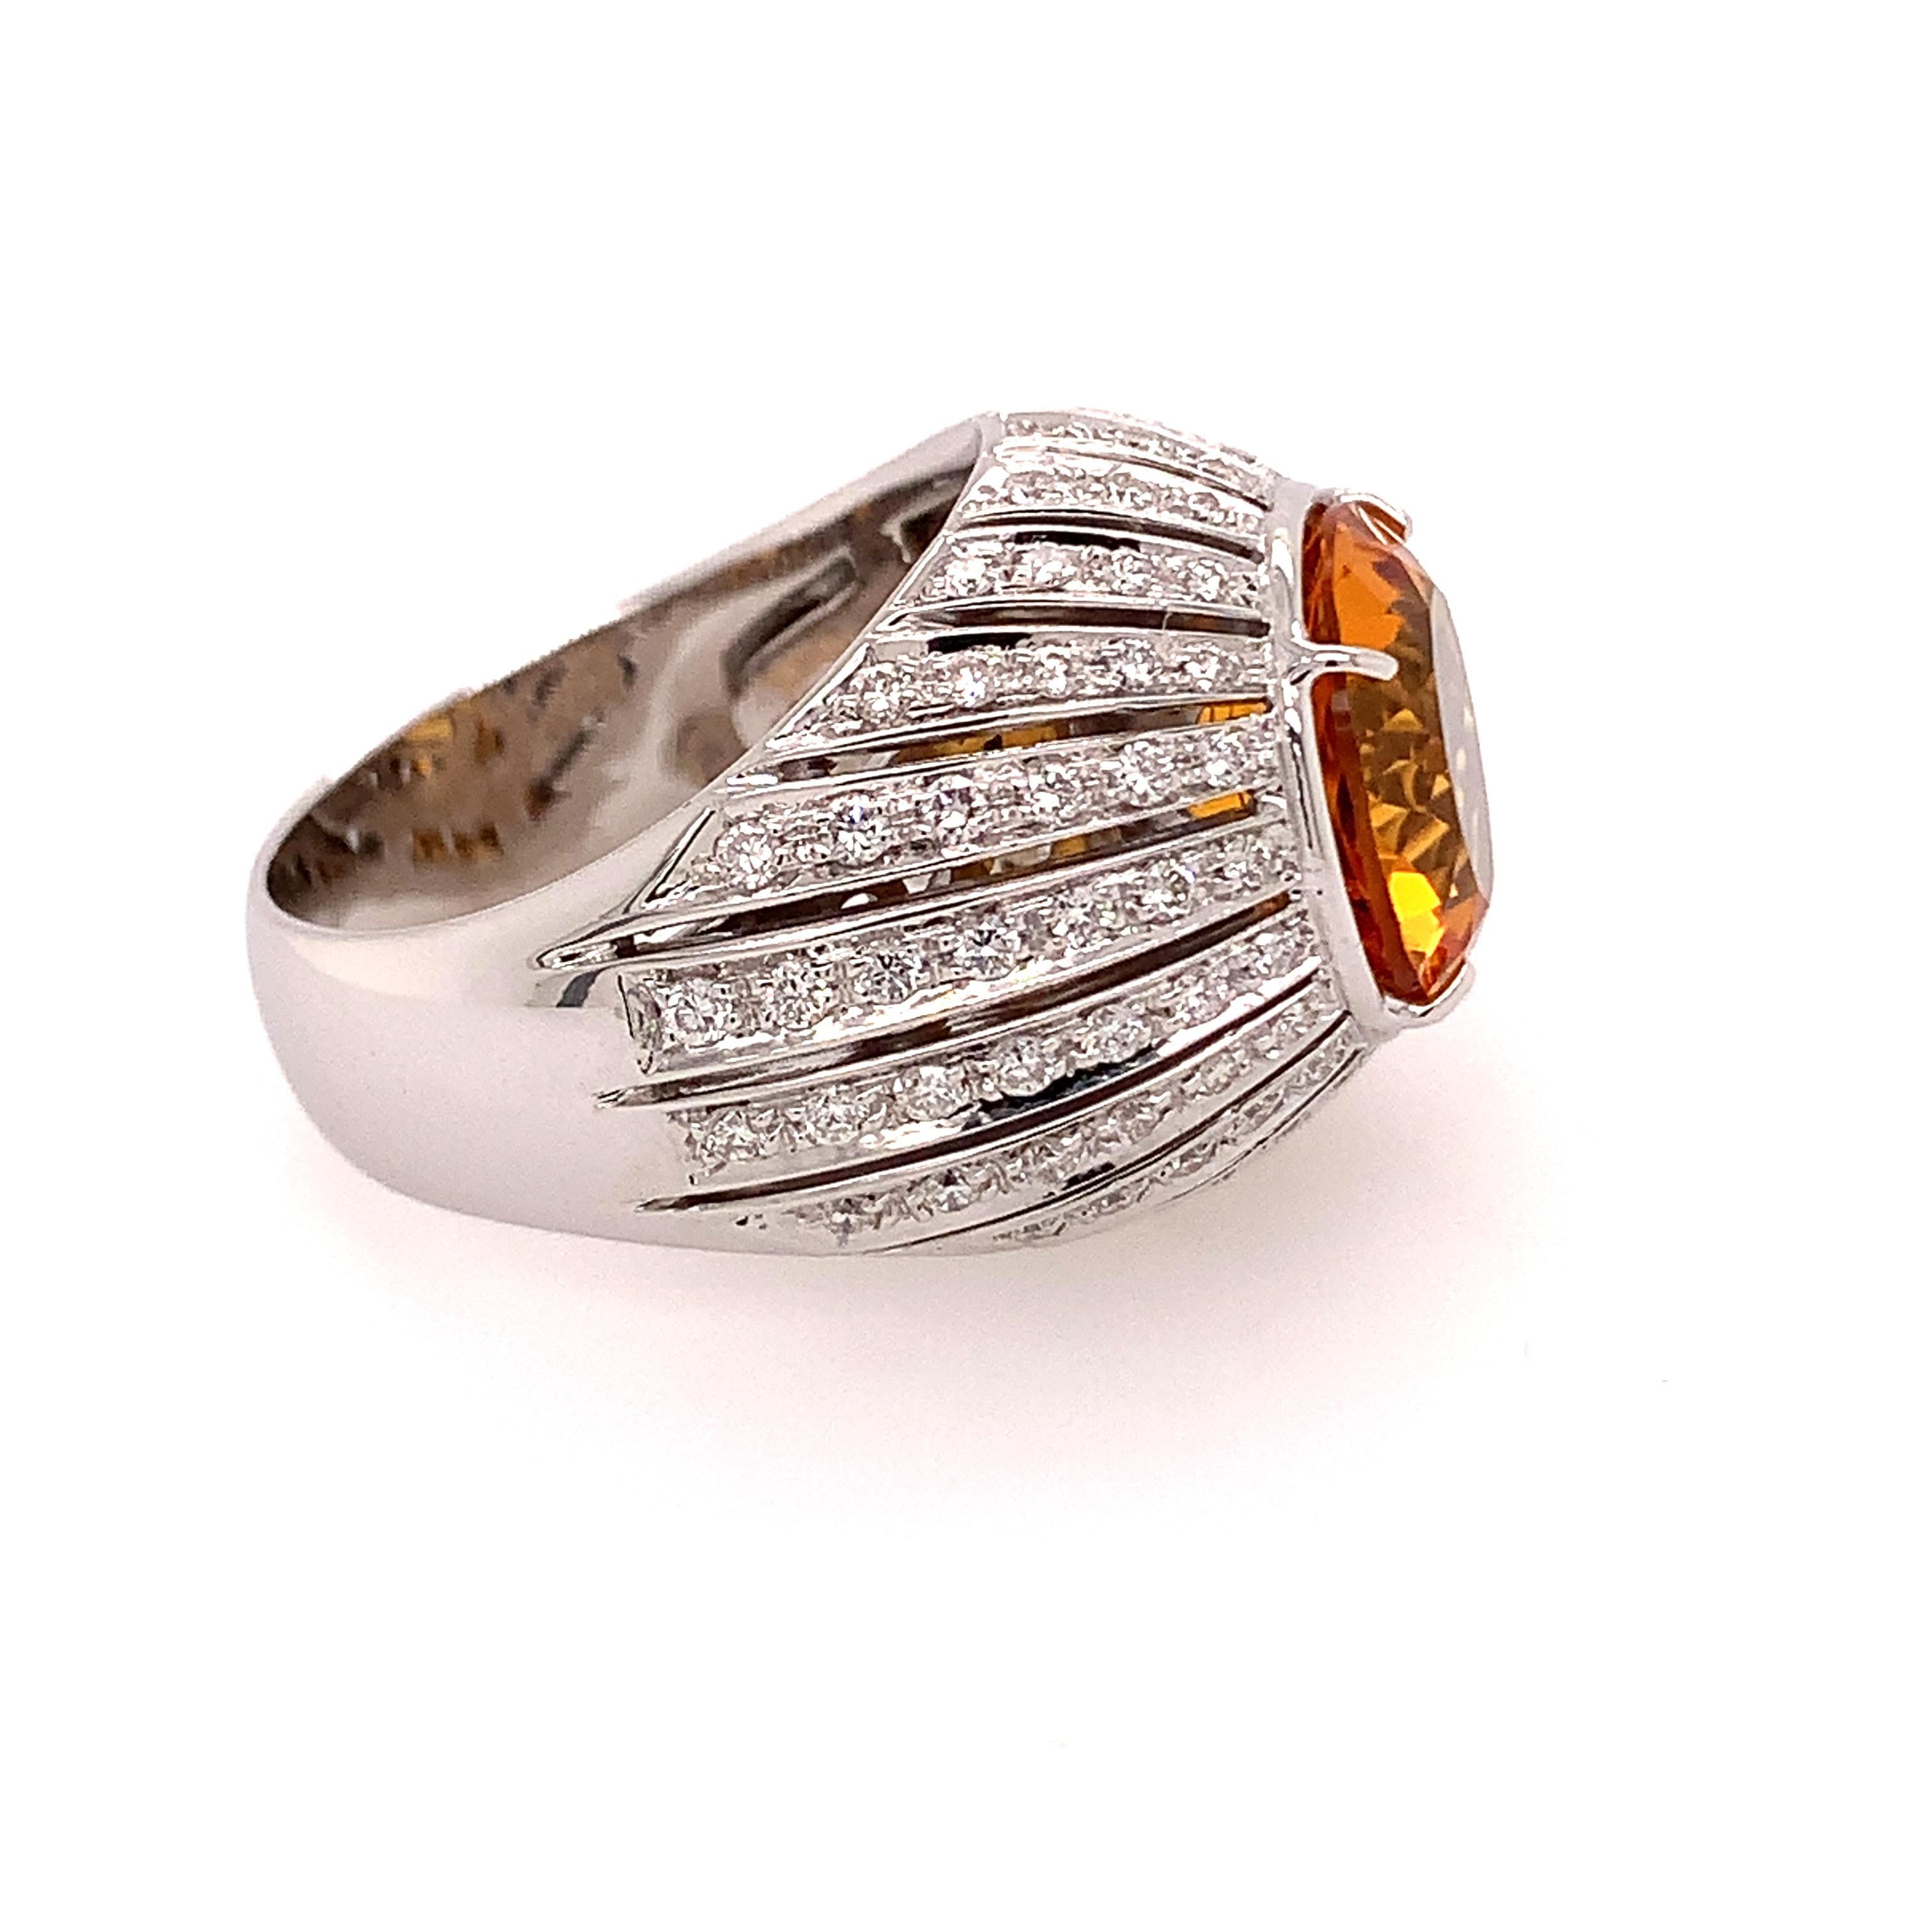 On sale on First Dibs only for 3 week.  This beautiful ring is a stunning piece created in Valenza.  18kt white gold grs 15,40  a beautiful round citrine ct 5,21 ,  and stripes of white diamonds ct 1,14
Made In Italy in Valenza. 
Dont miss a special